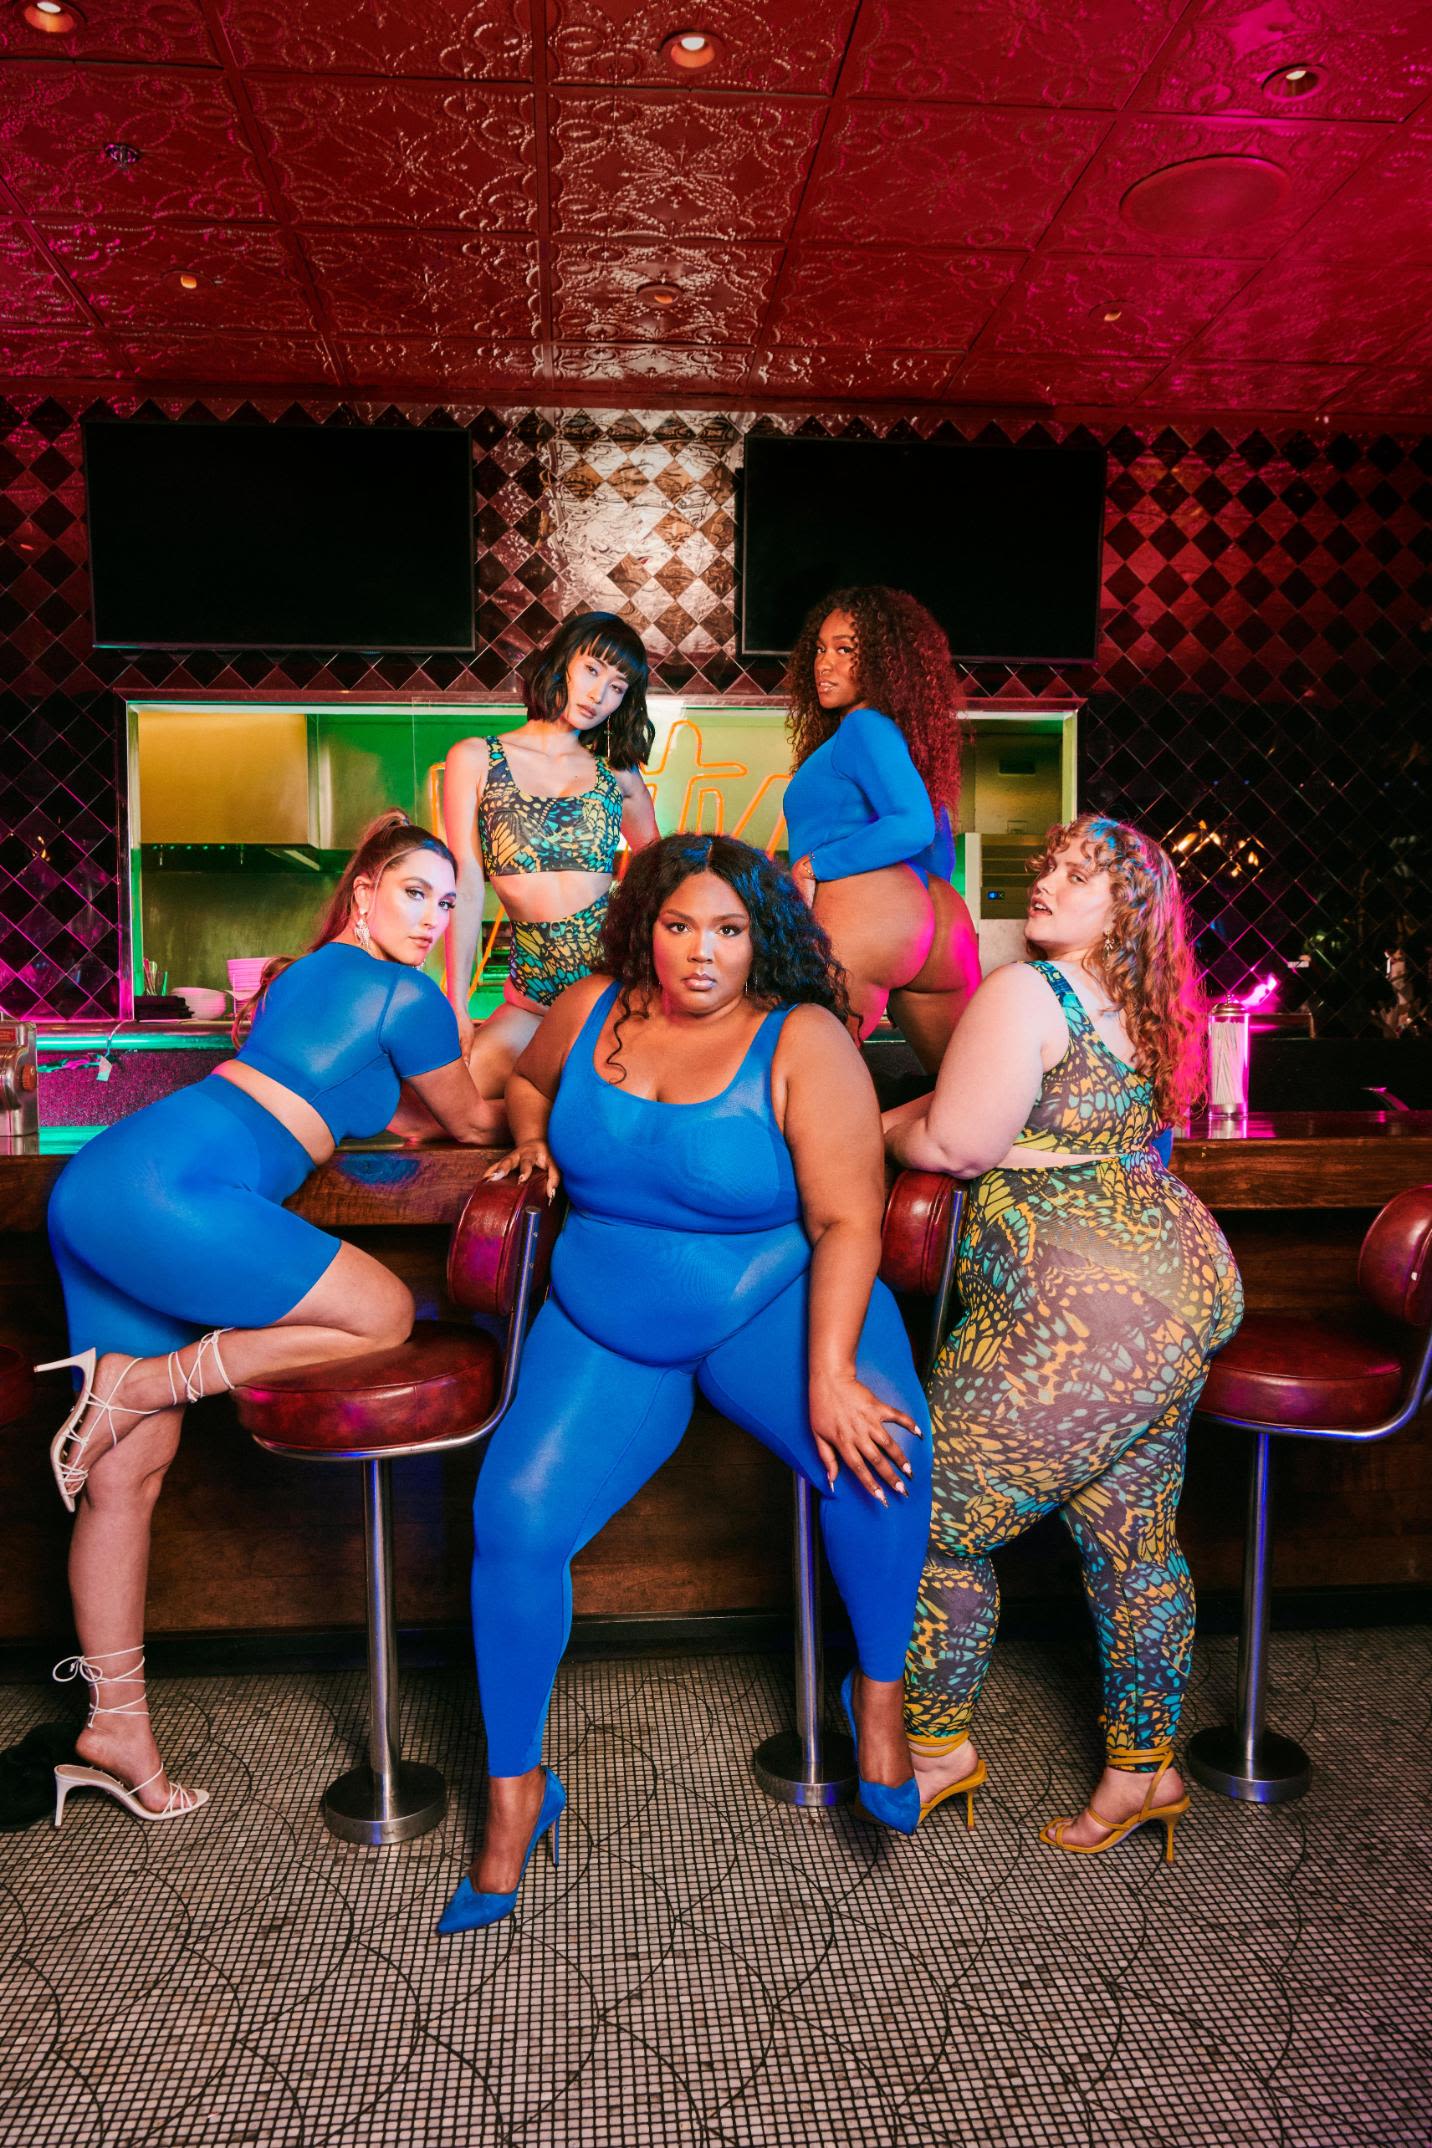 Lizzo is expanding her shapewear brand to include underwear.